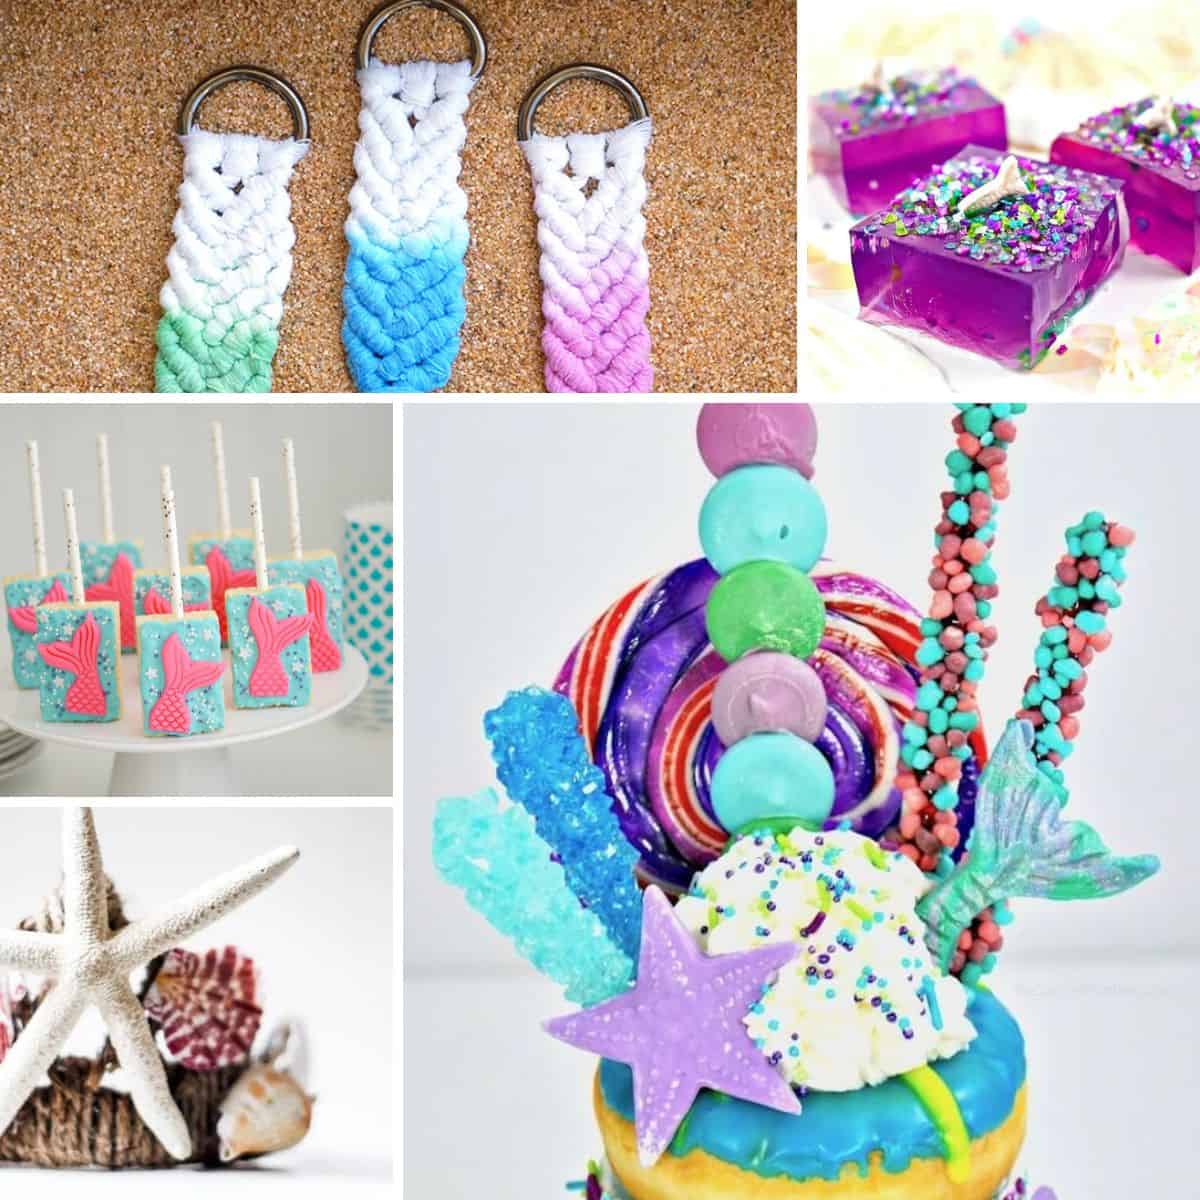 28 Gorgeous Mermaid Snacks and Crafts